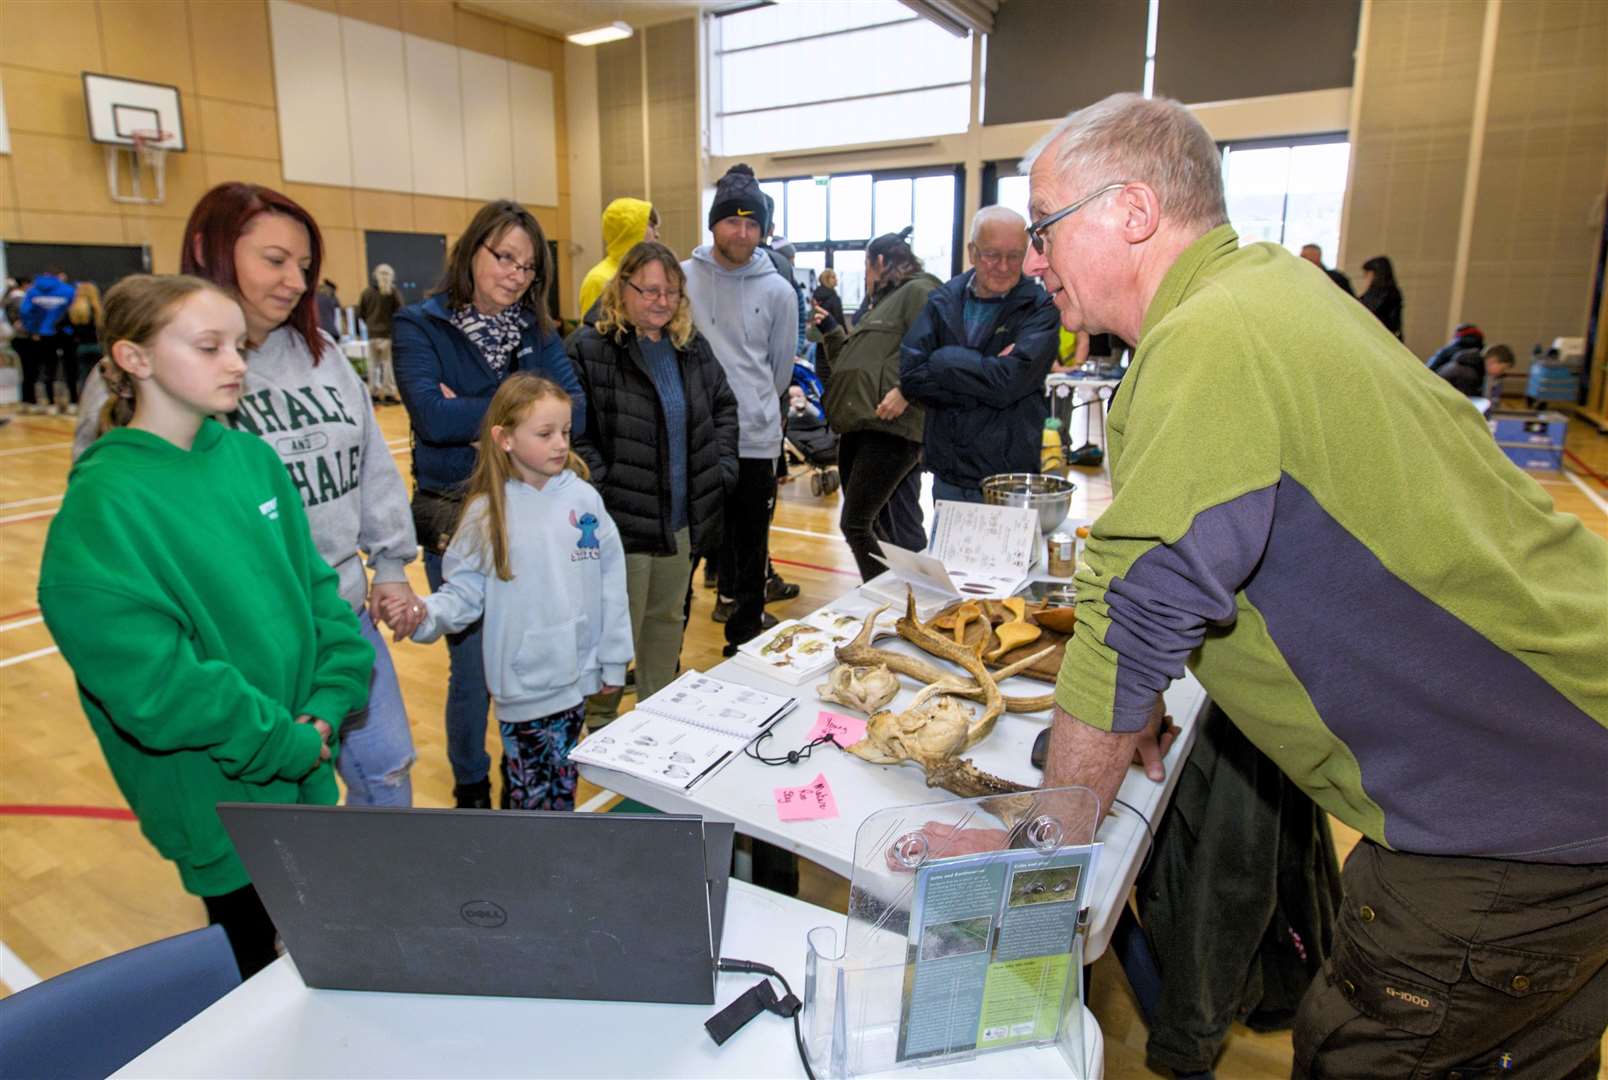 Robert Griffiths from Elgin was kept busy explaining natural history to the visitors on his Bush Craft stand. Photo: Robert MacDonald/Northern Studios